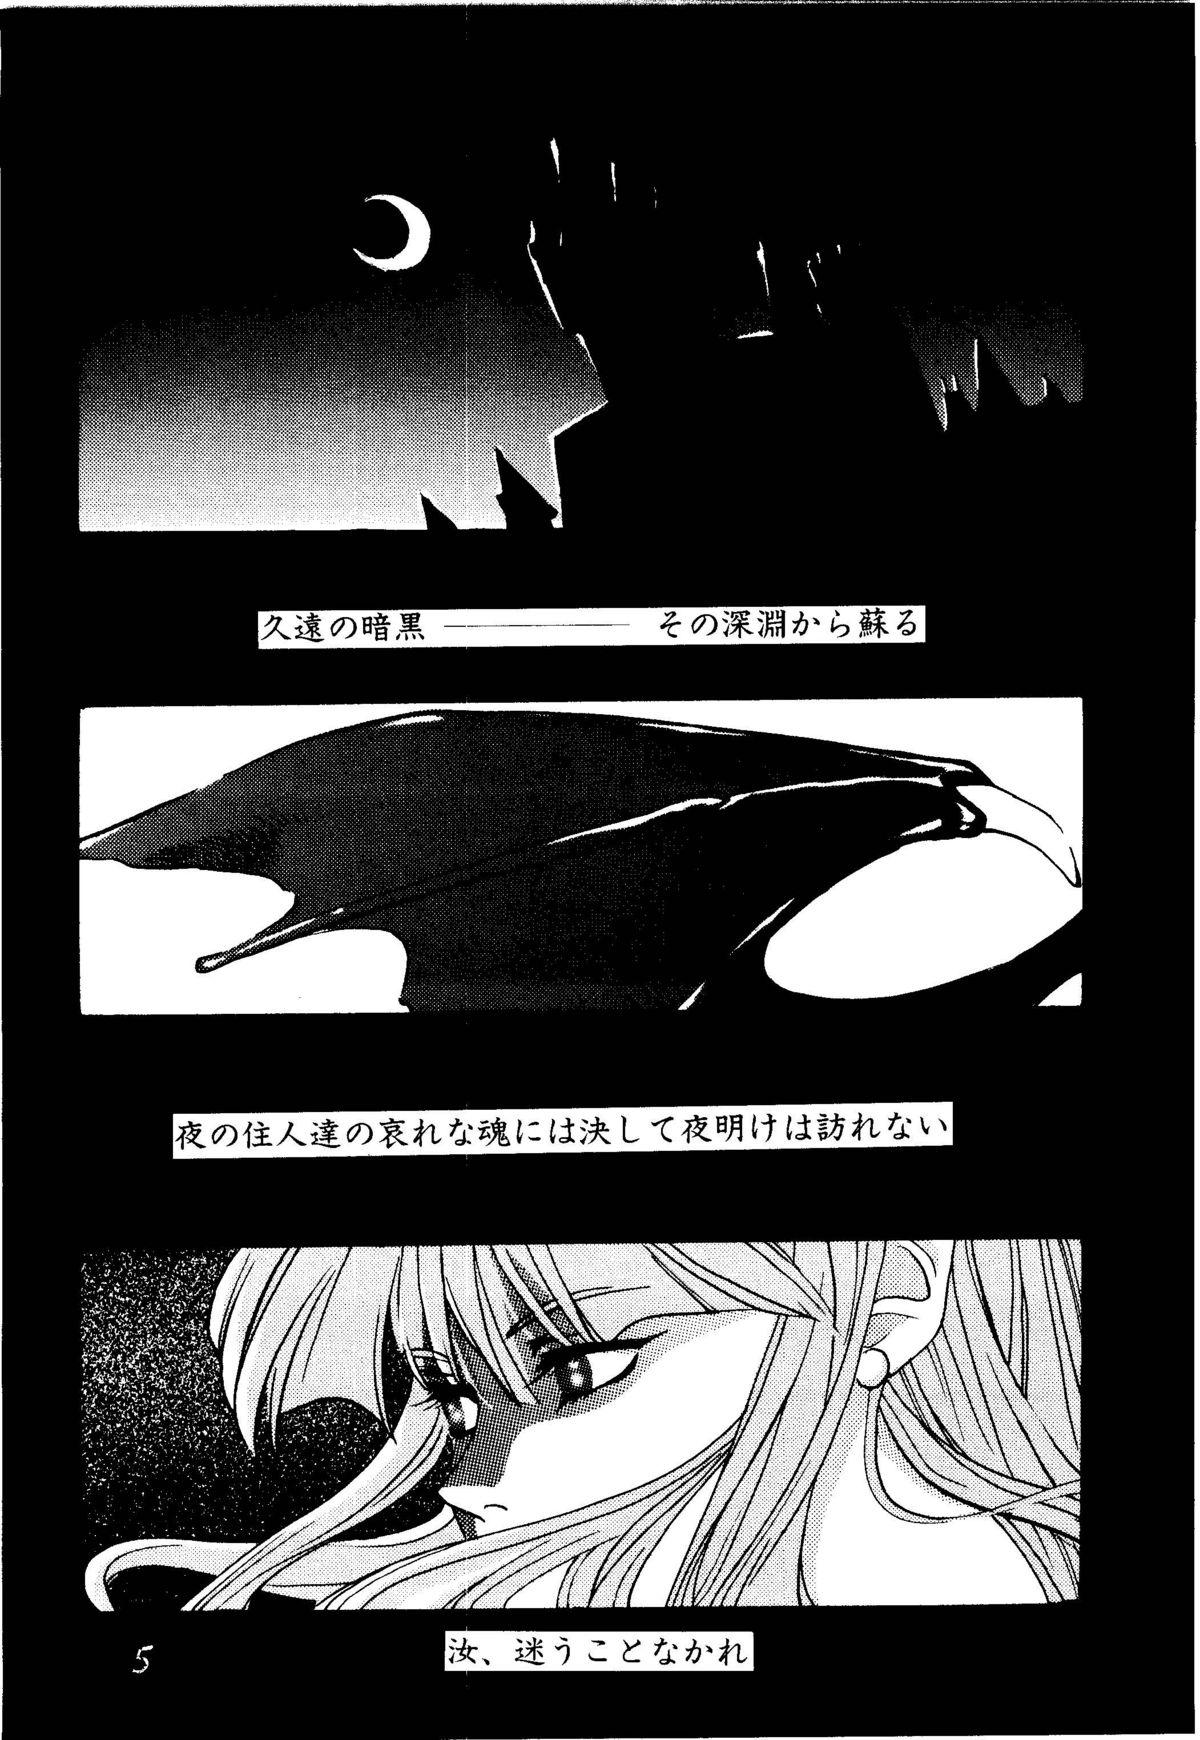 Small Fire and Ice - Darkstalkers Highschool - Page 5